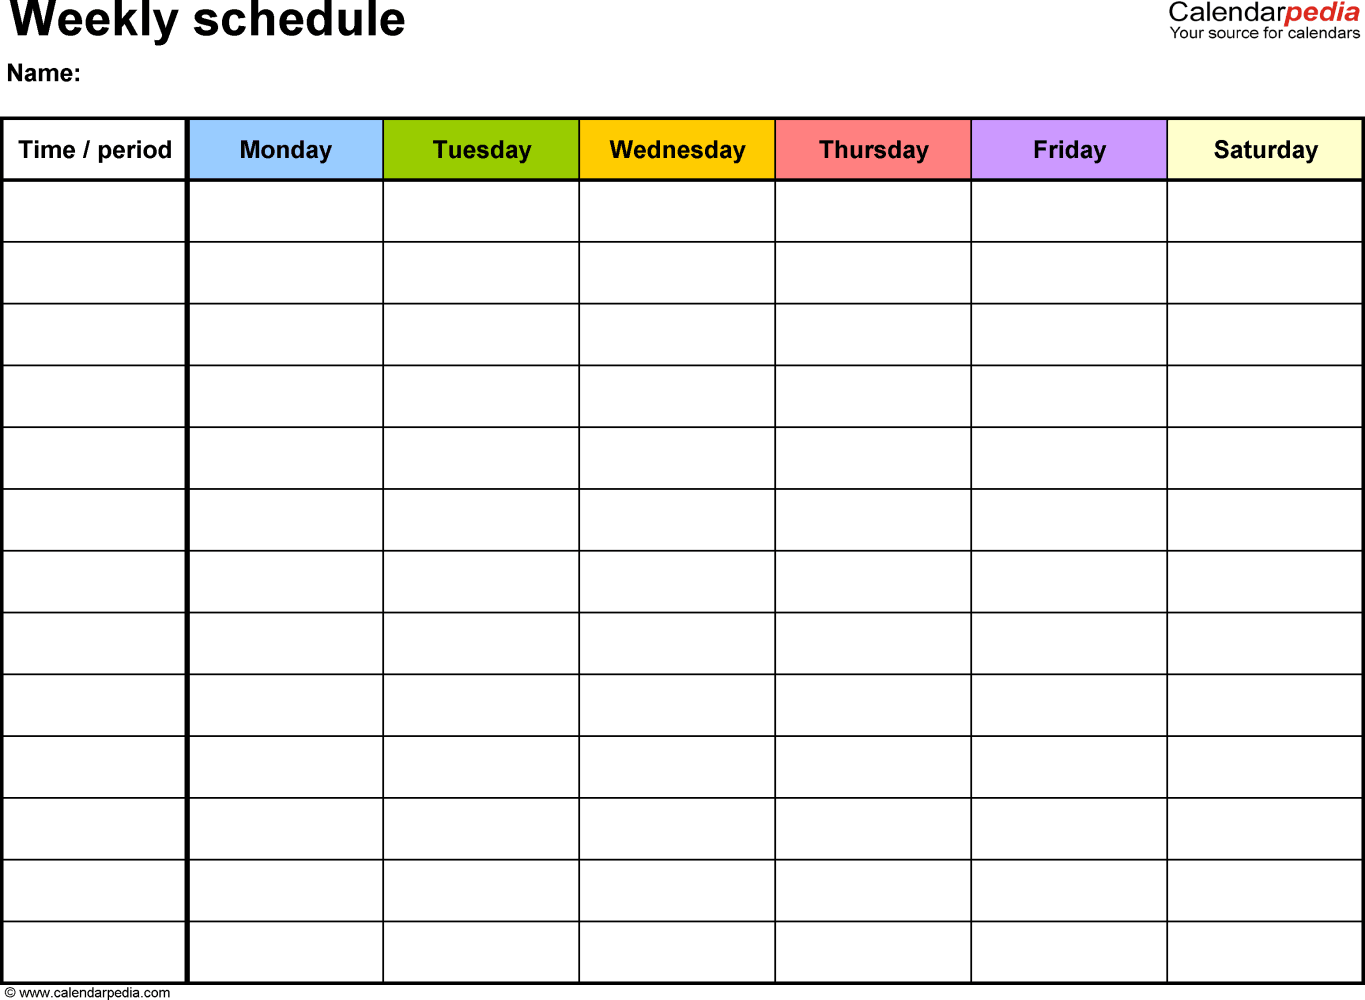 41 Creating Daily Calendar Appointment Template Now by Daily Calendar Appointment Template